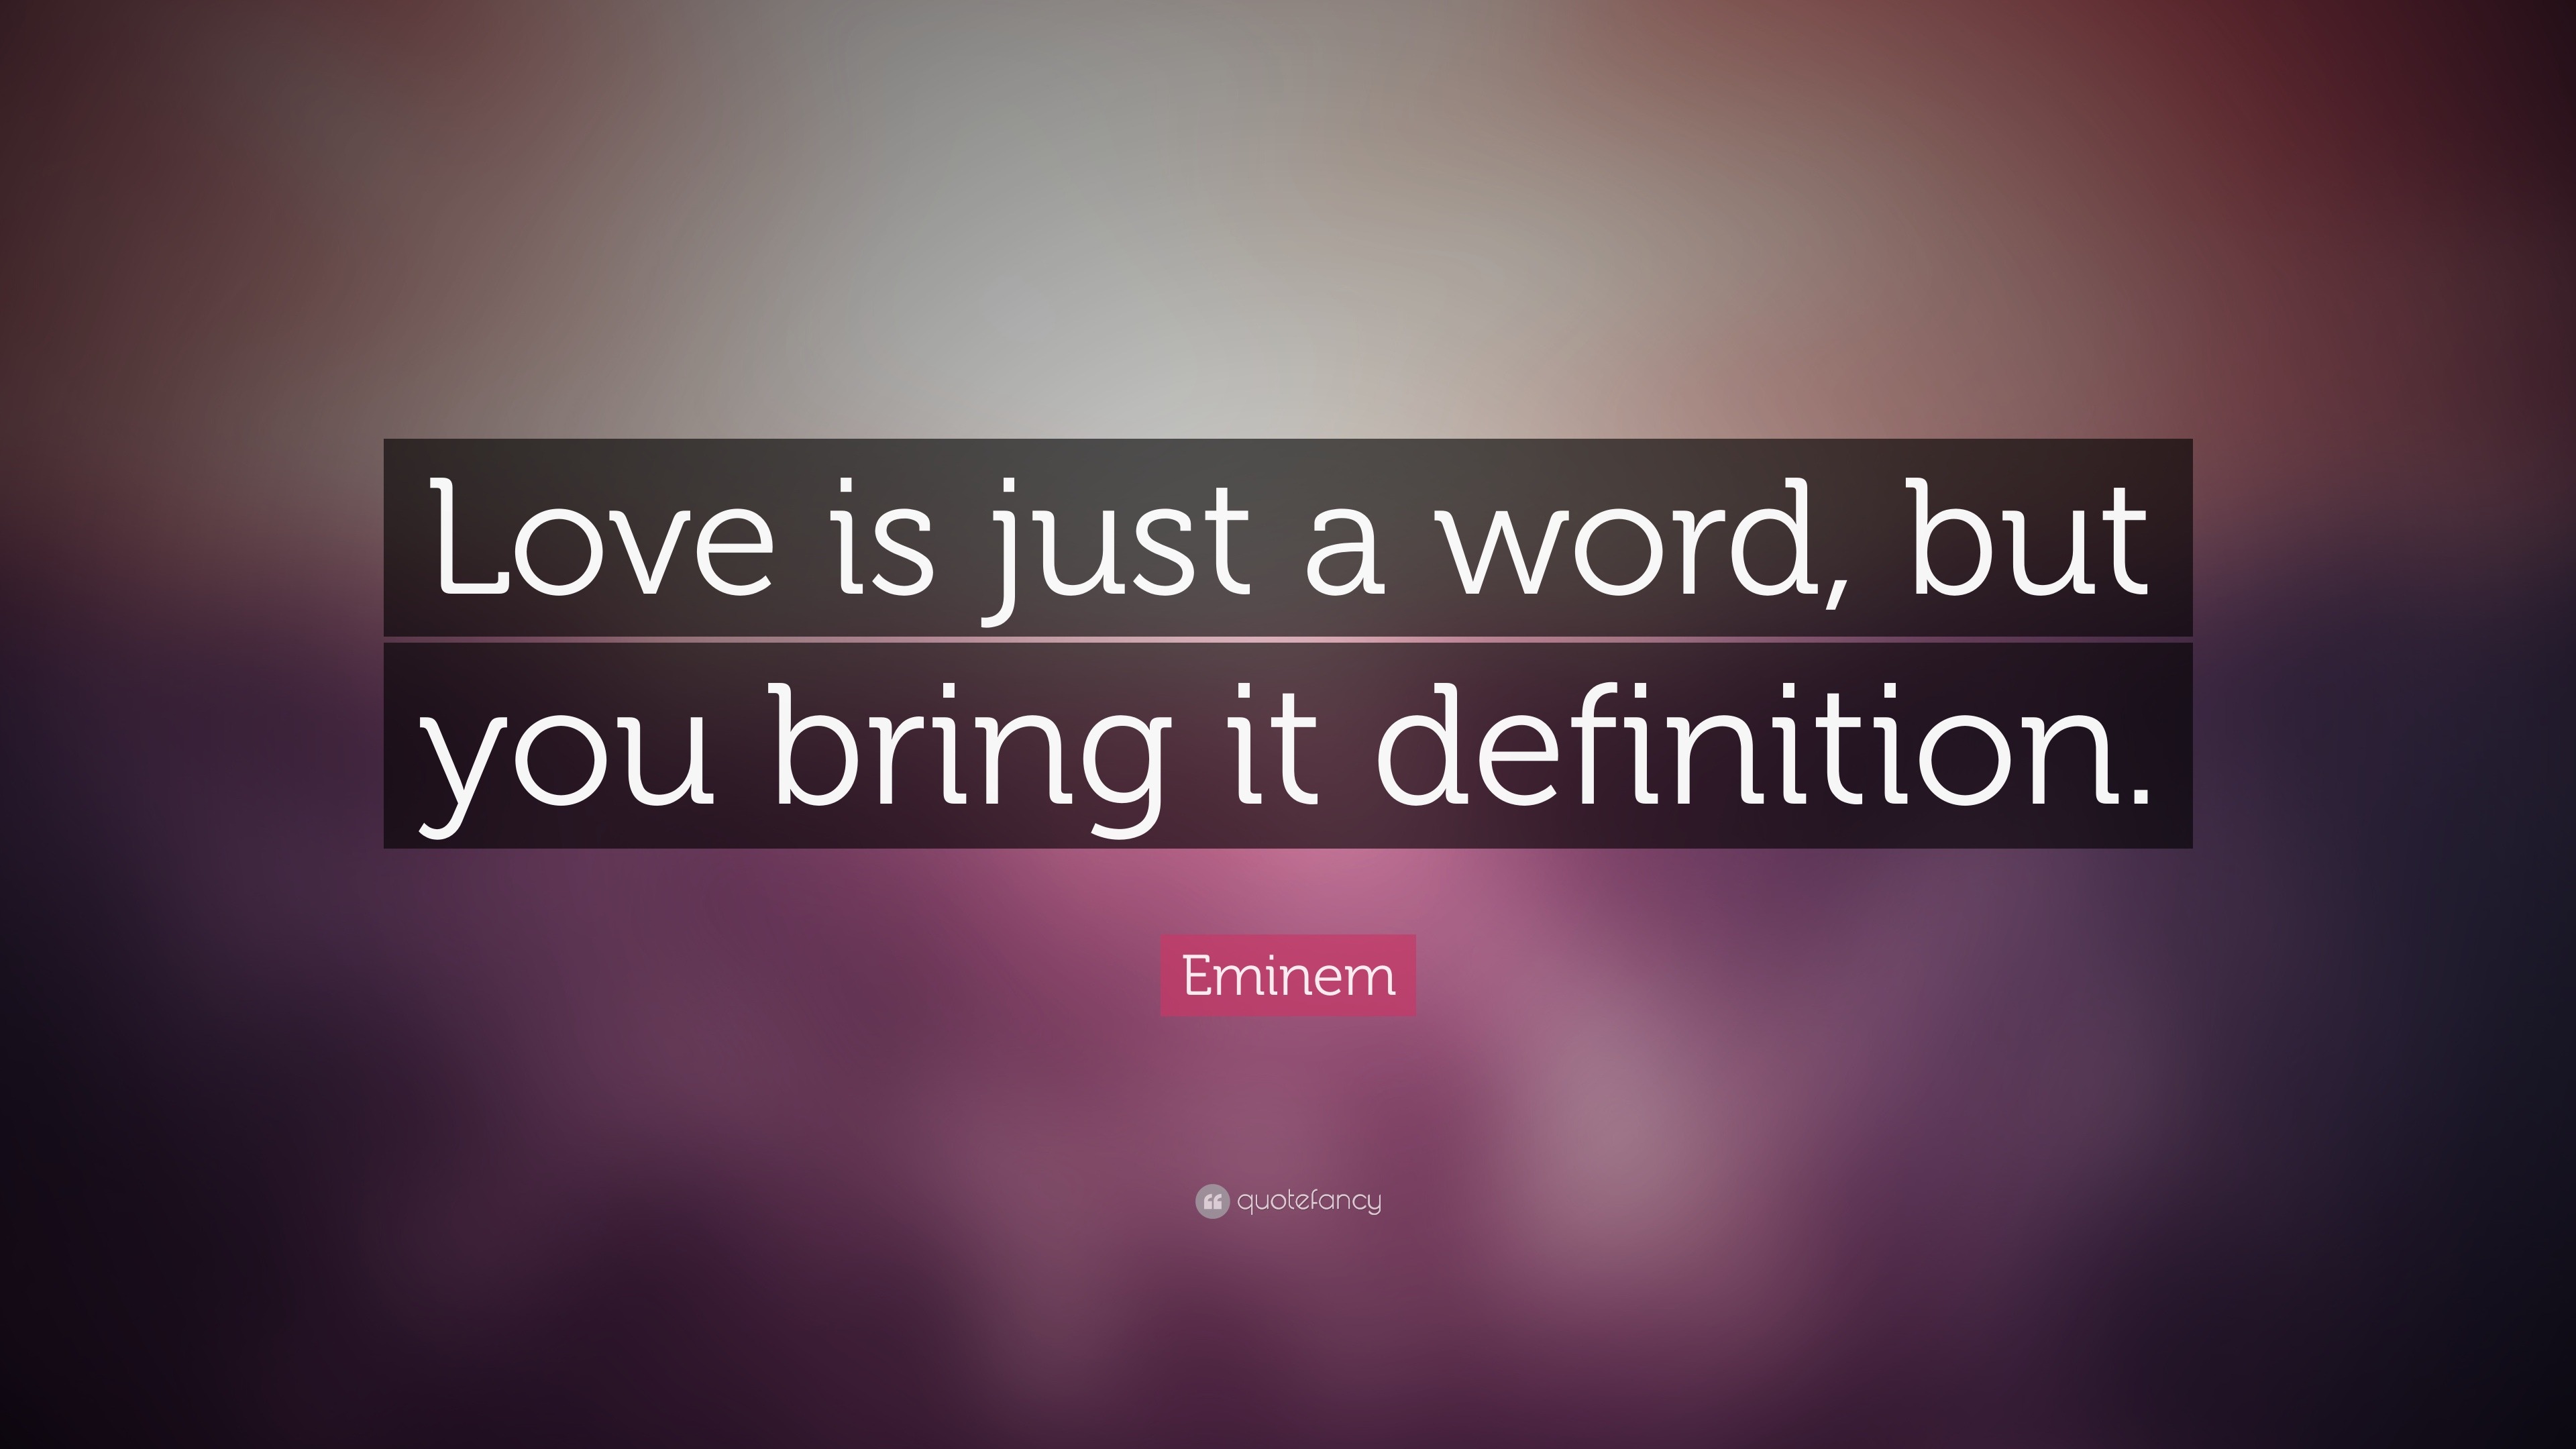 Eminem Quote “Love is just a word but you bring it definition